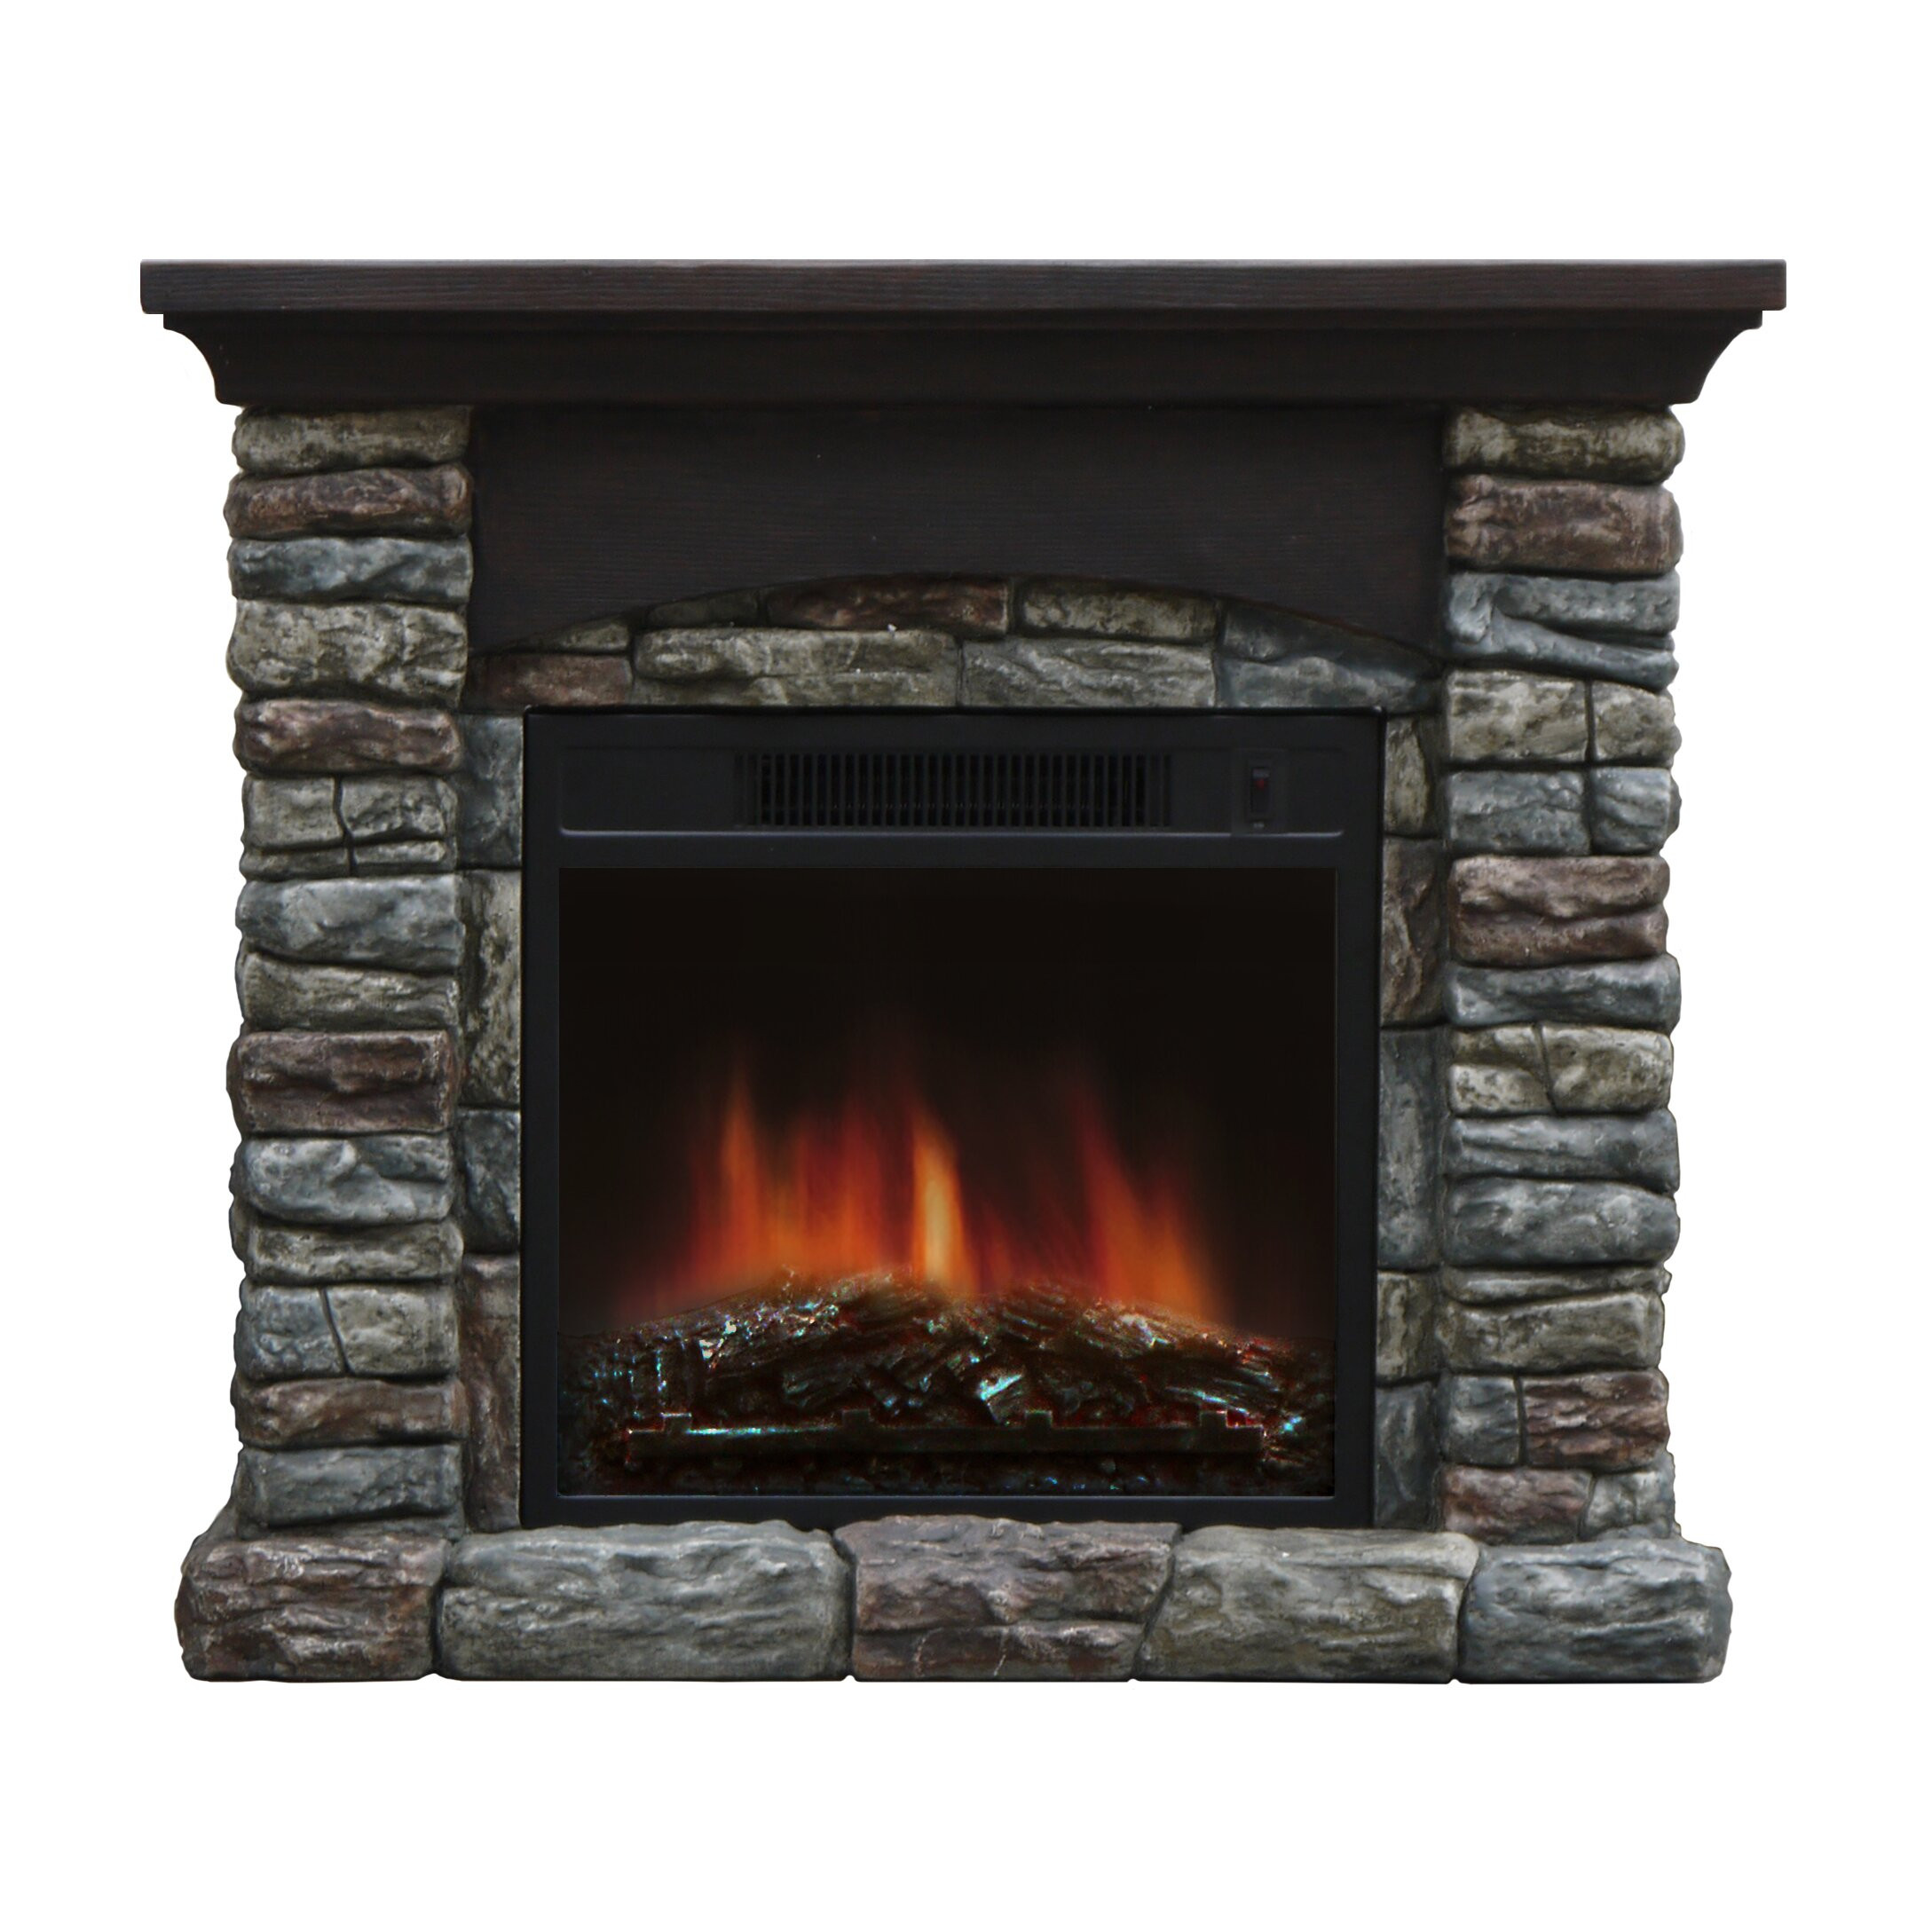 Stone Fireplace Electric
 Stonegate Breckin Electric Fireplace & Reviews